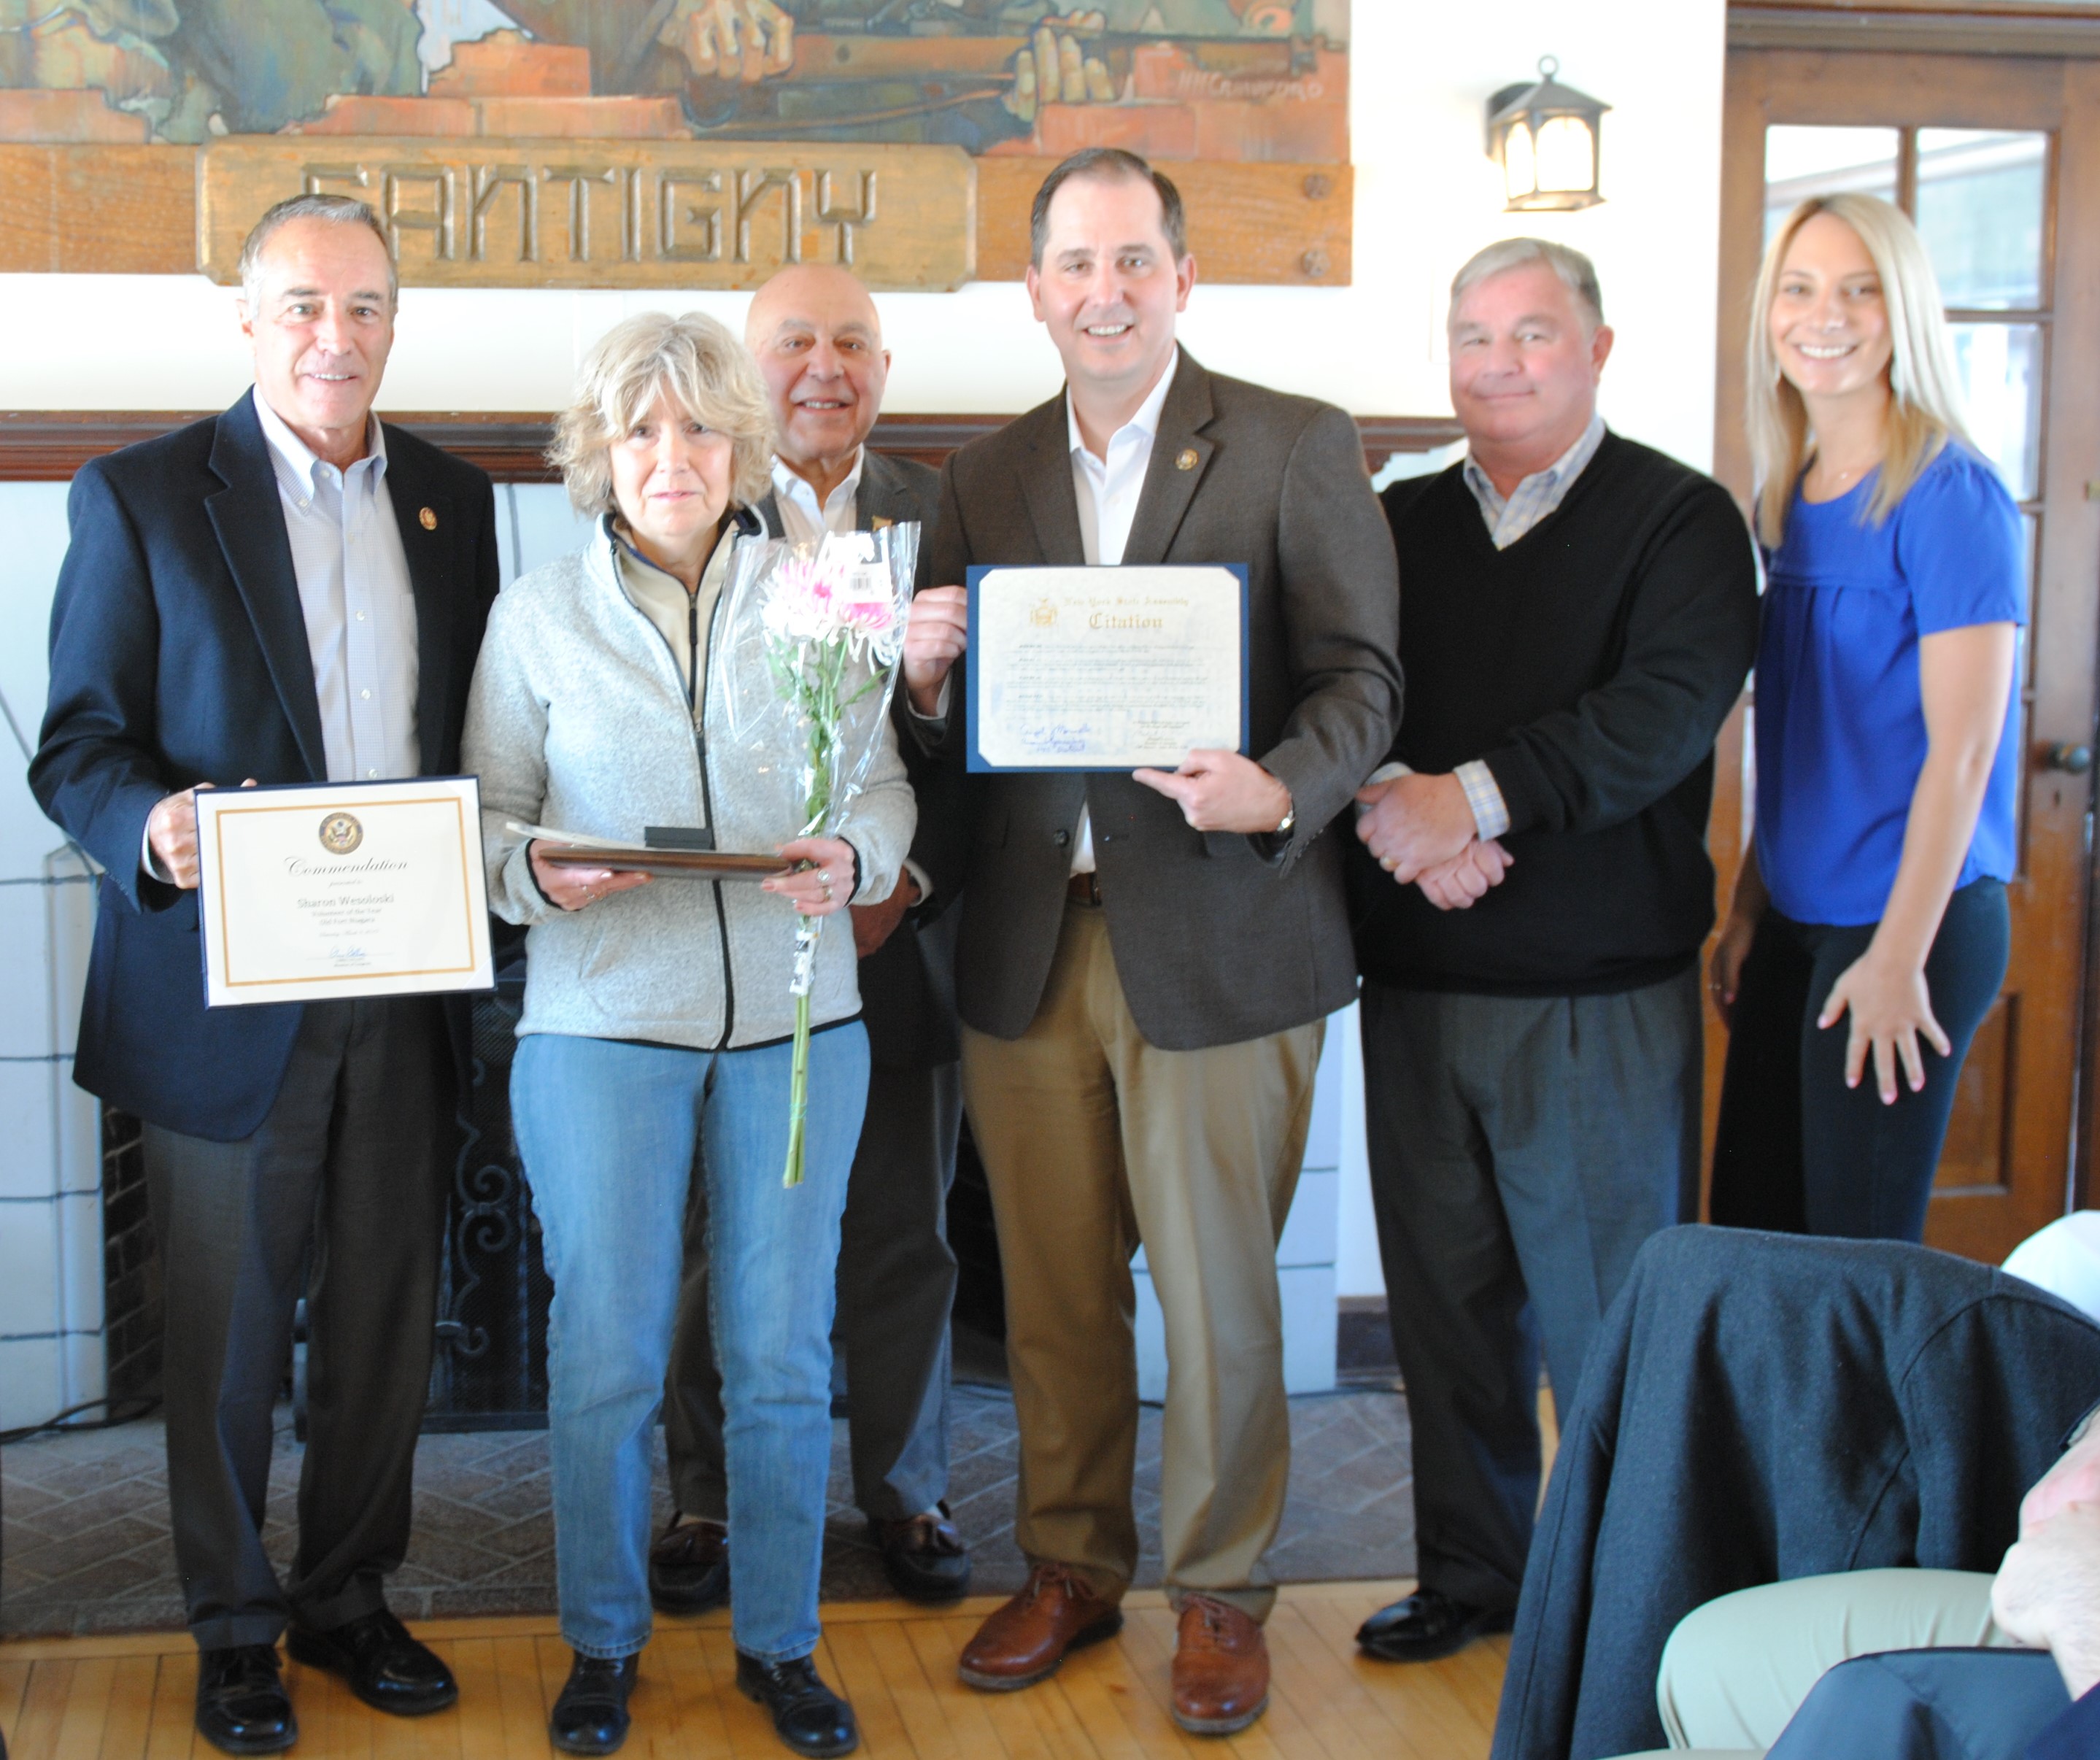 Sharon Wesoloski was named Old Fort Niagara Association's 2018 Volunteer of the Year and also received special awards from Congressman Chris Collins and State Assemblyman Mike Norris. State Assemblyman Angelo Morinello, Porter Town Councilman Tim Adamson and the fort's volunteer coordinator, Erika Schrader, are also pictured.